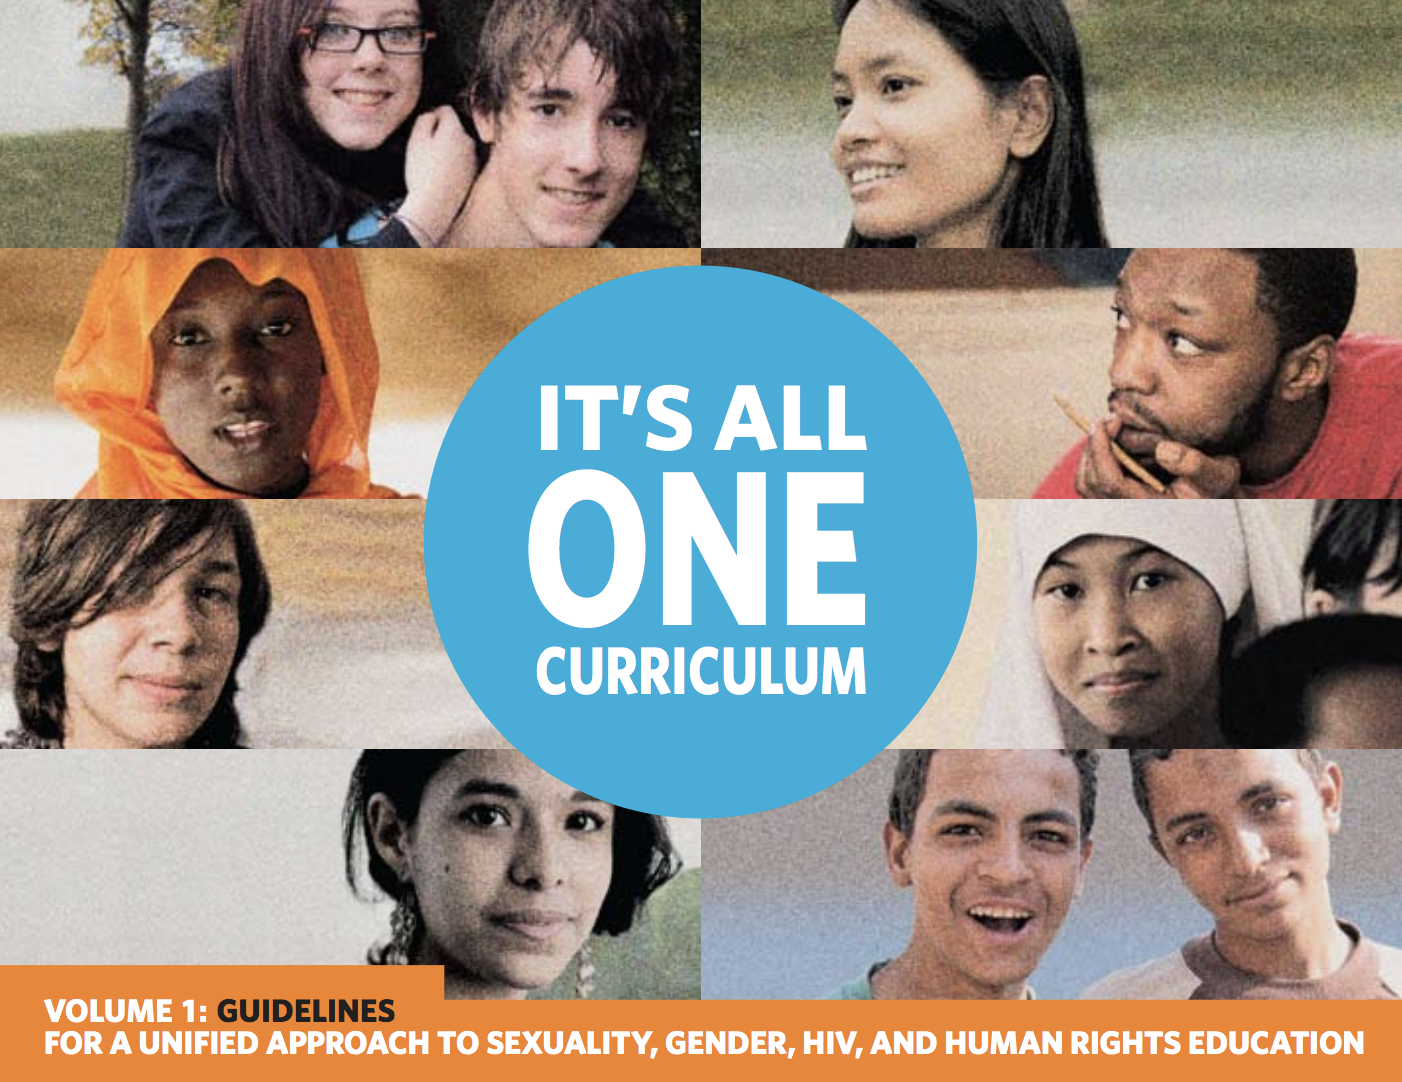 It's All One Curriculum: Guidelines and Activities for a Unified Approach to Sexuality, Gender, HIV and Human Rights Education